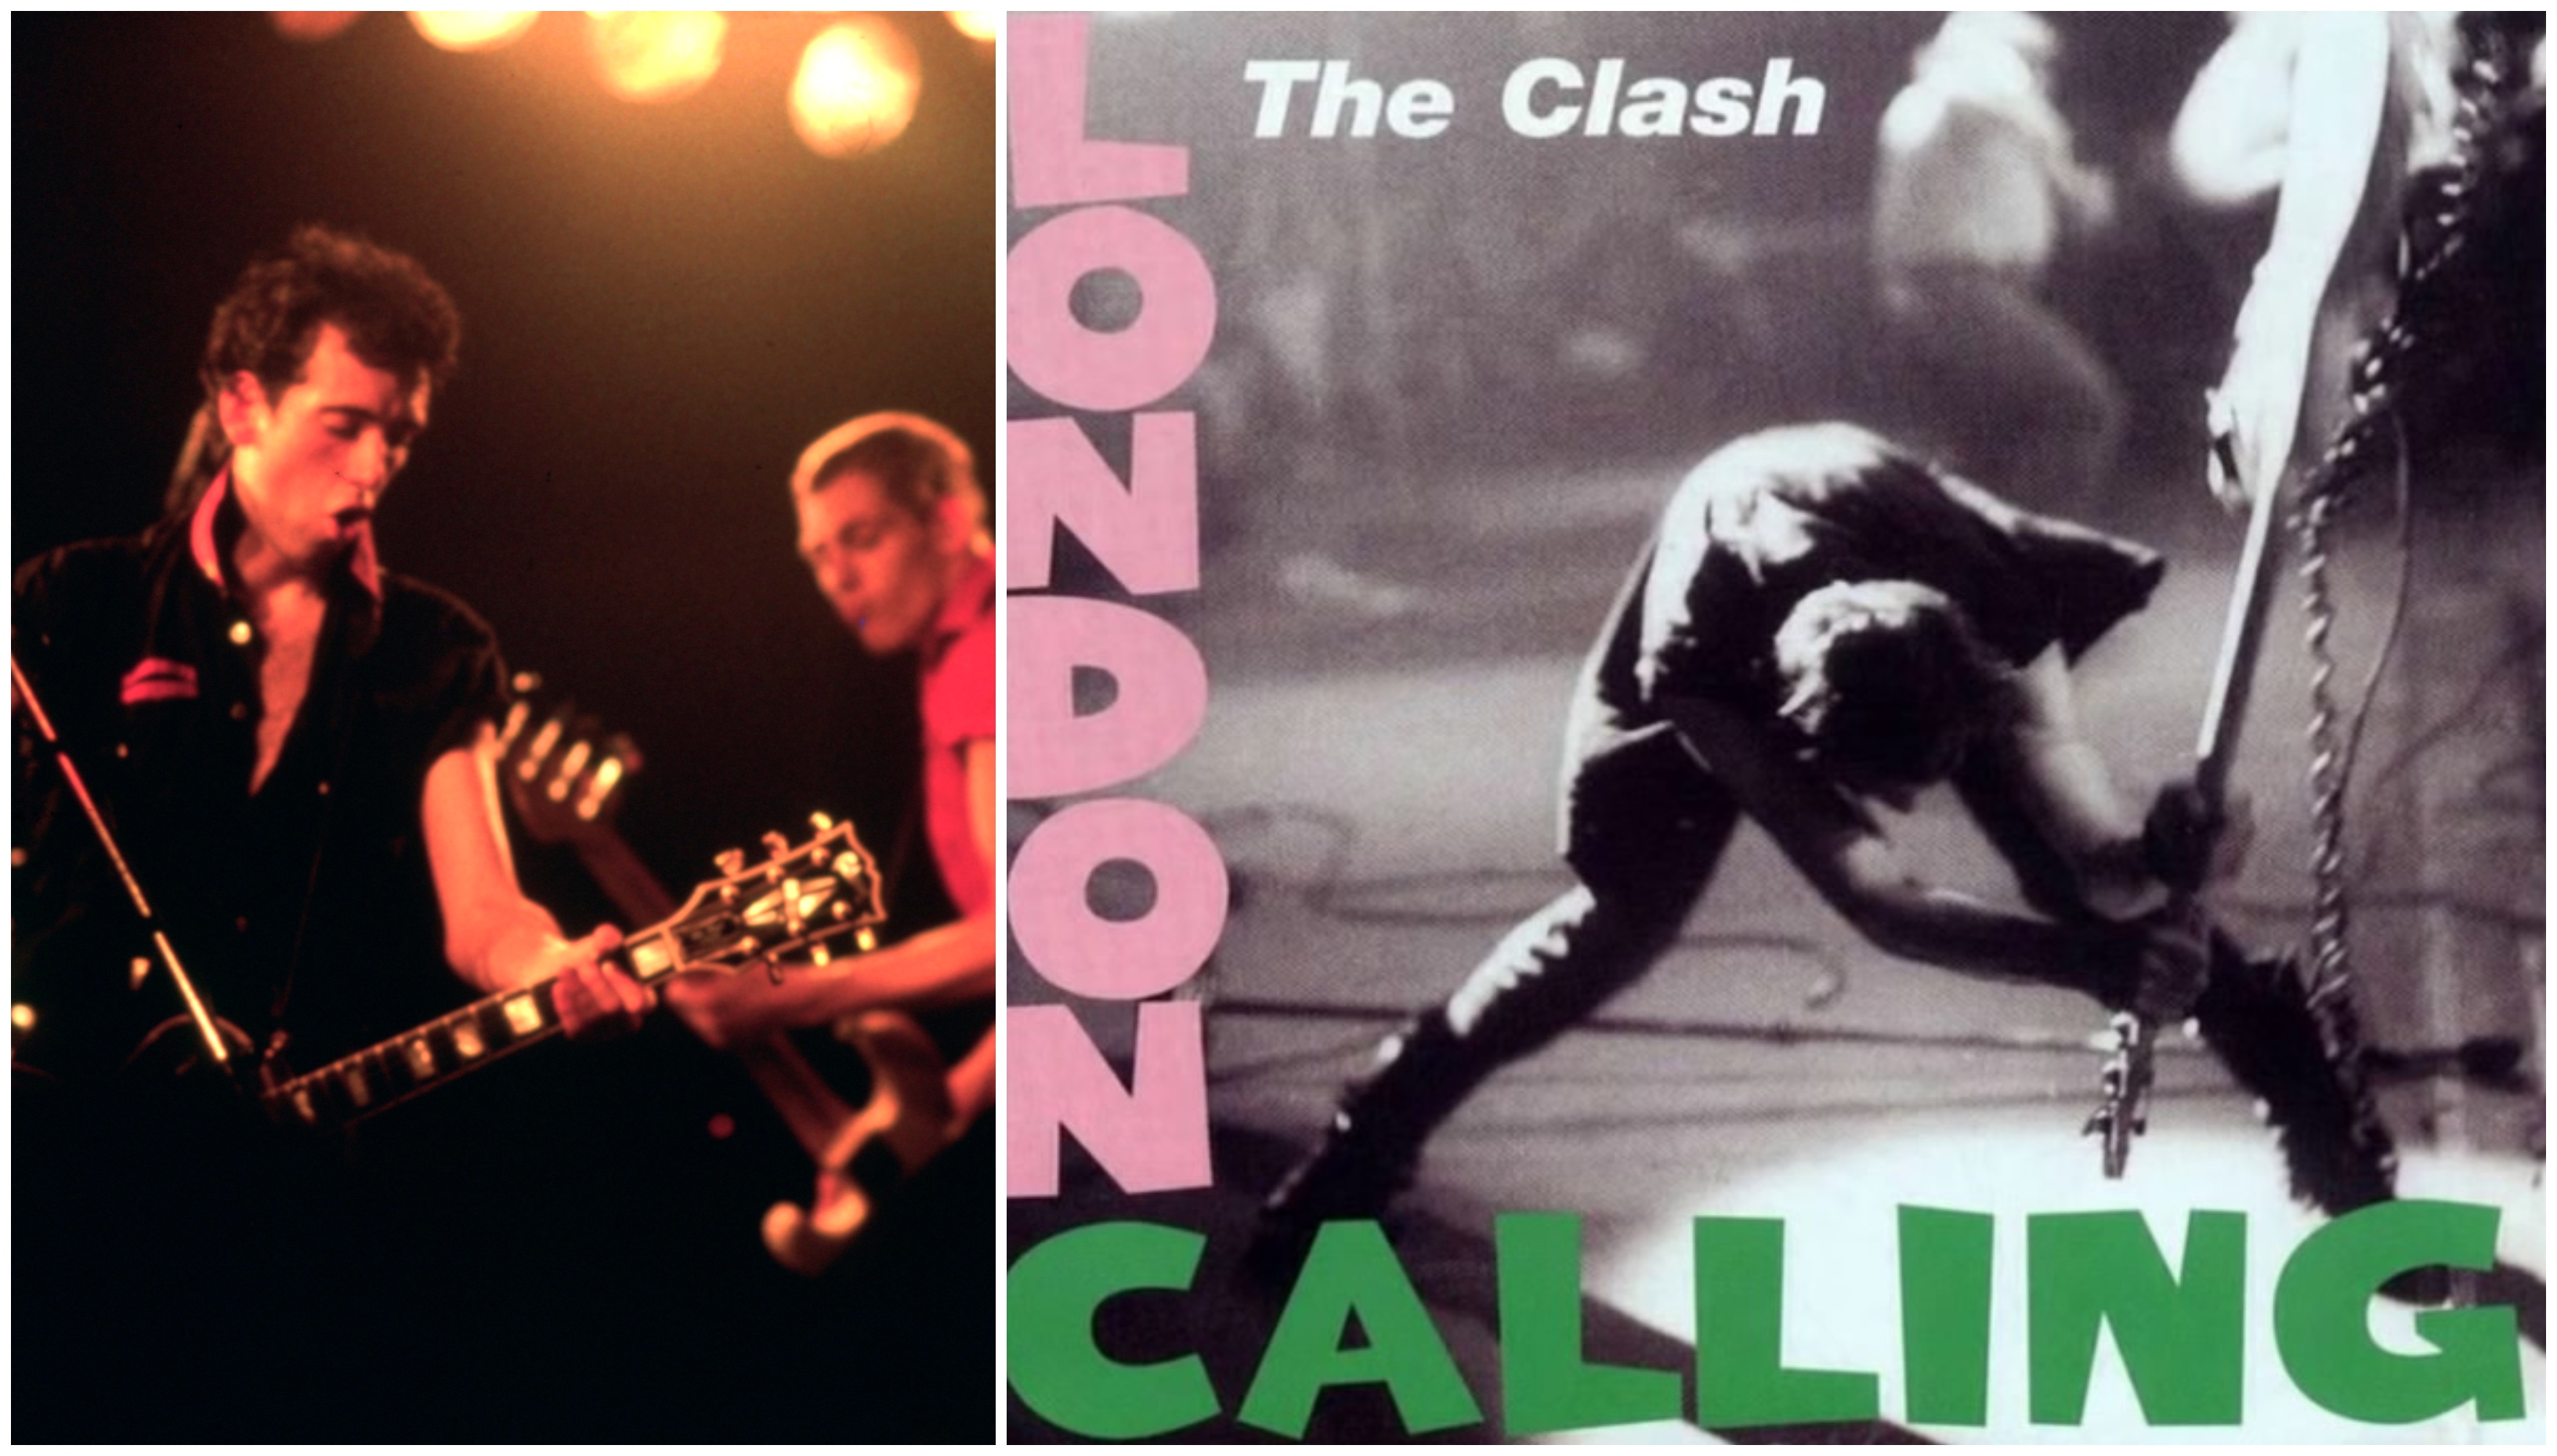 The Clash (left) and their famous album London Calling